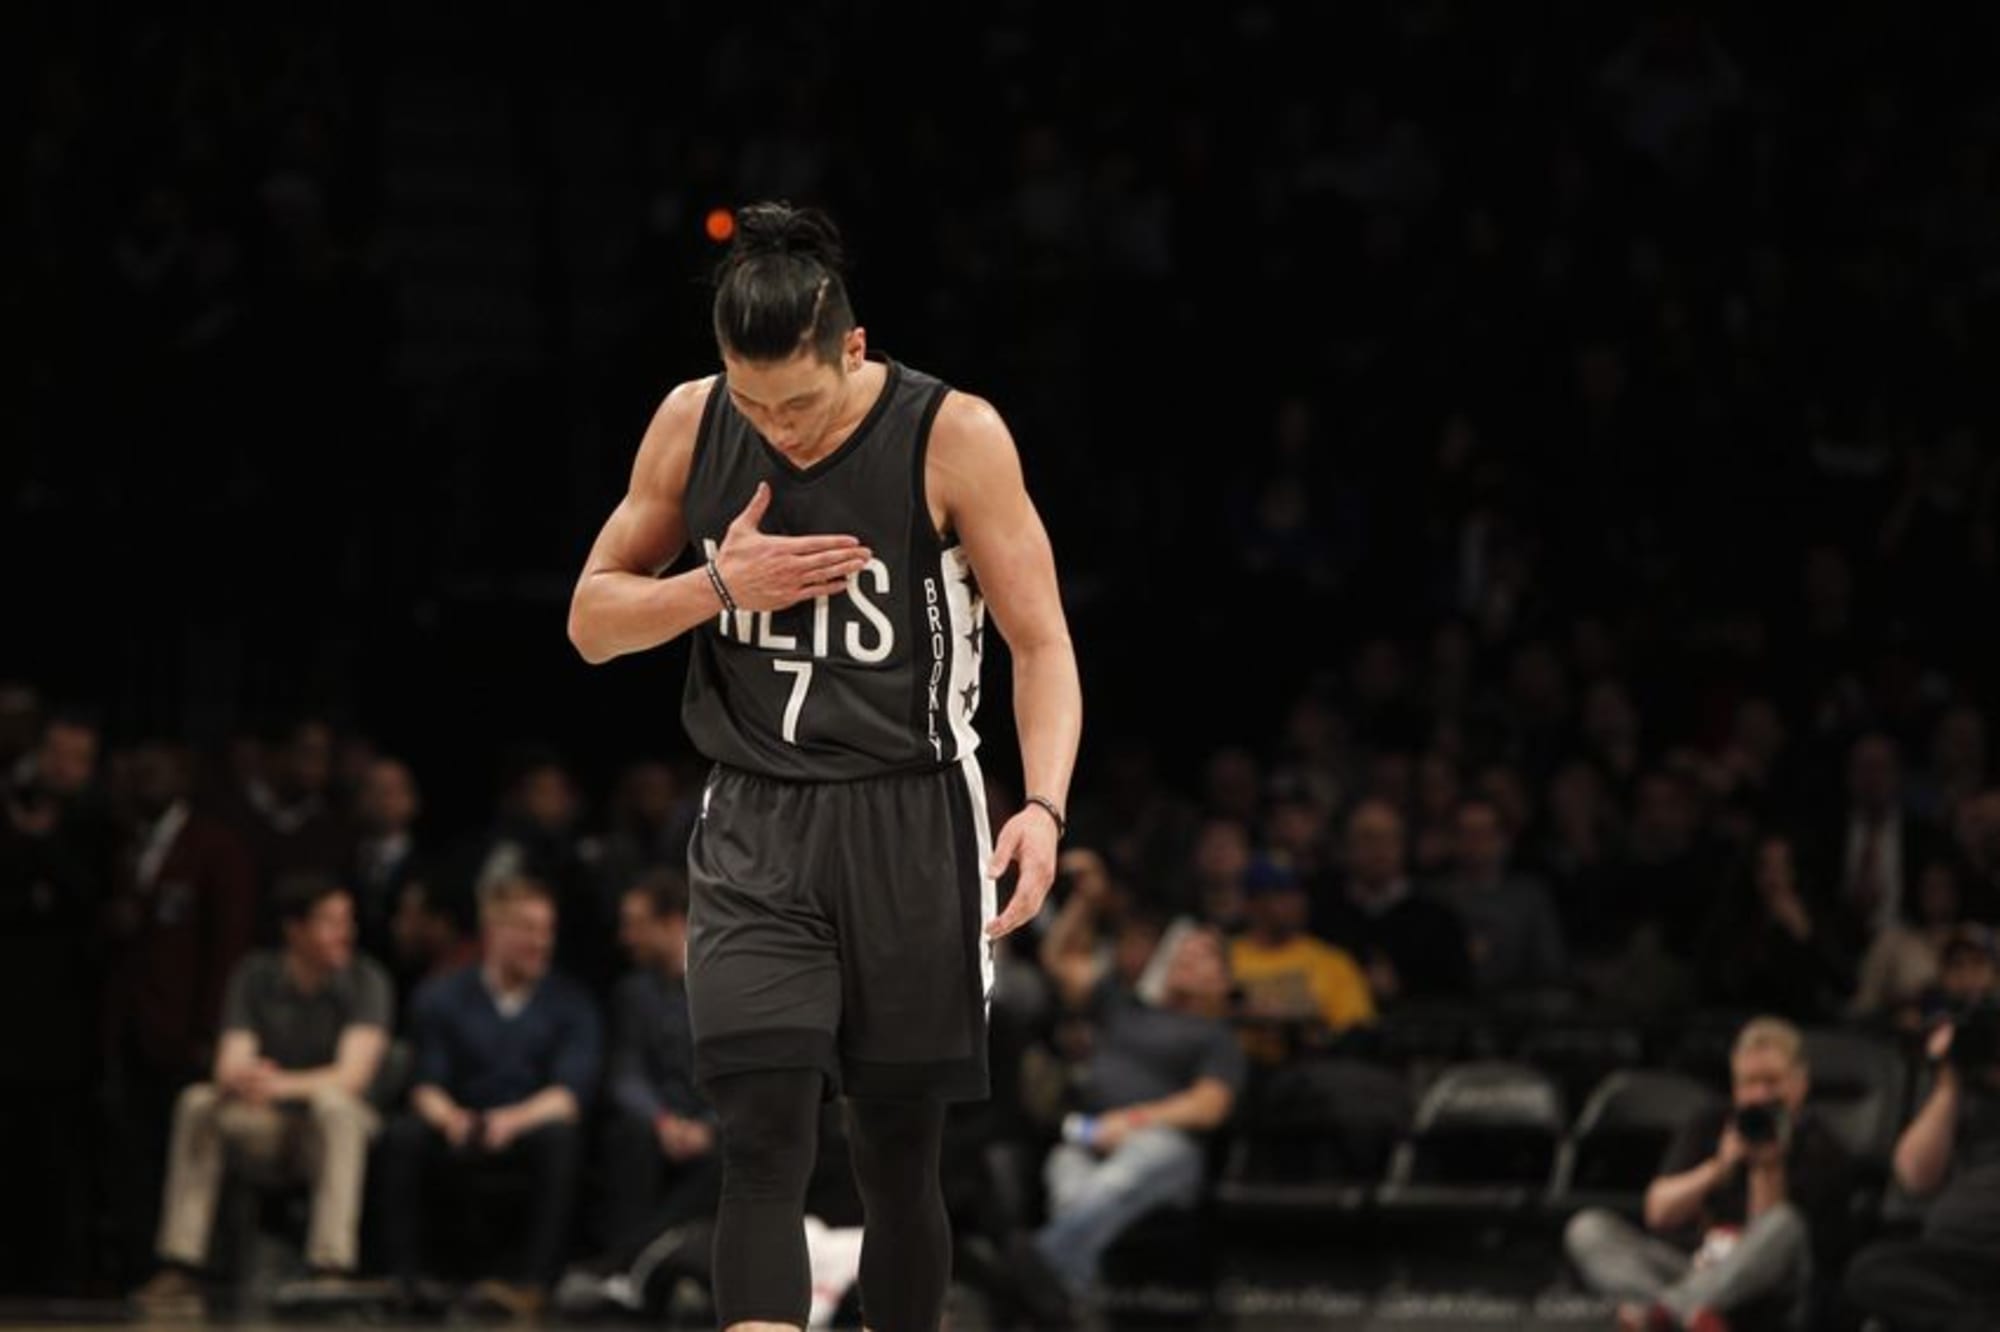 Jeremy Lin Is Returning to New York (With the Nets) - The New York Times